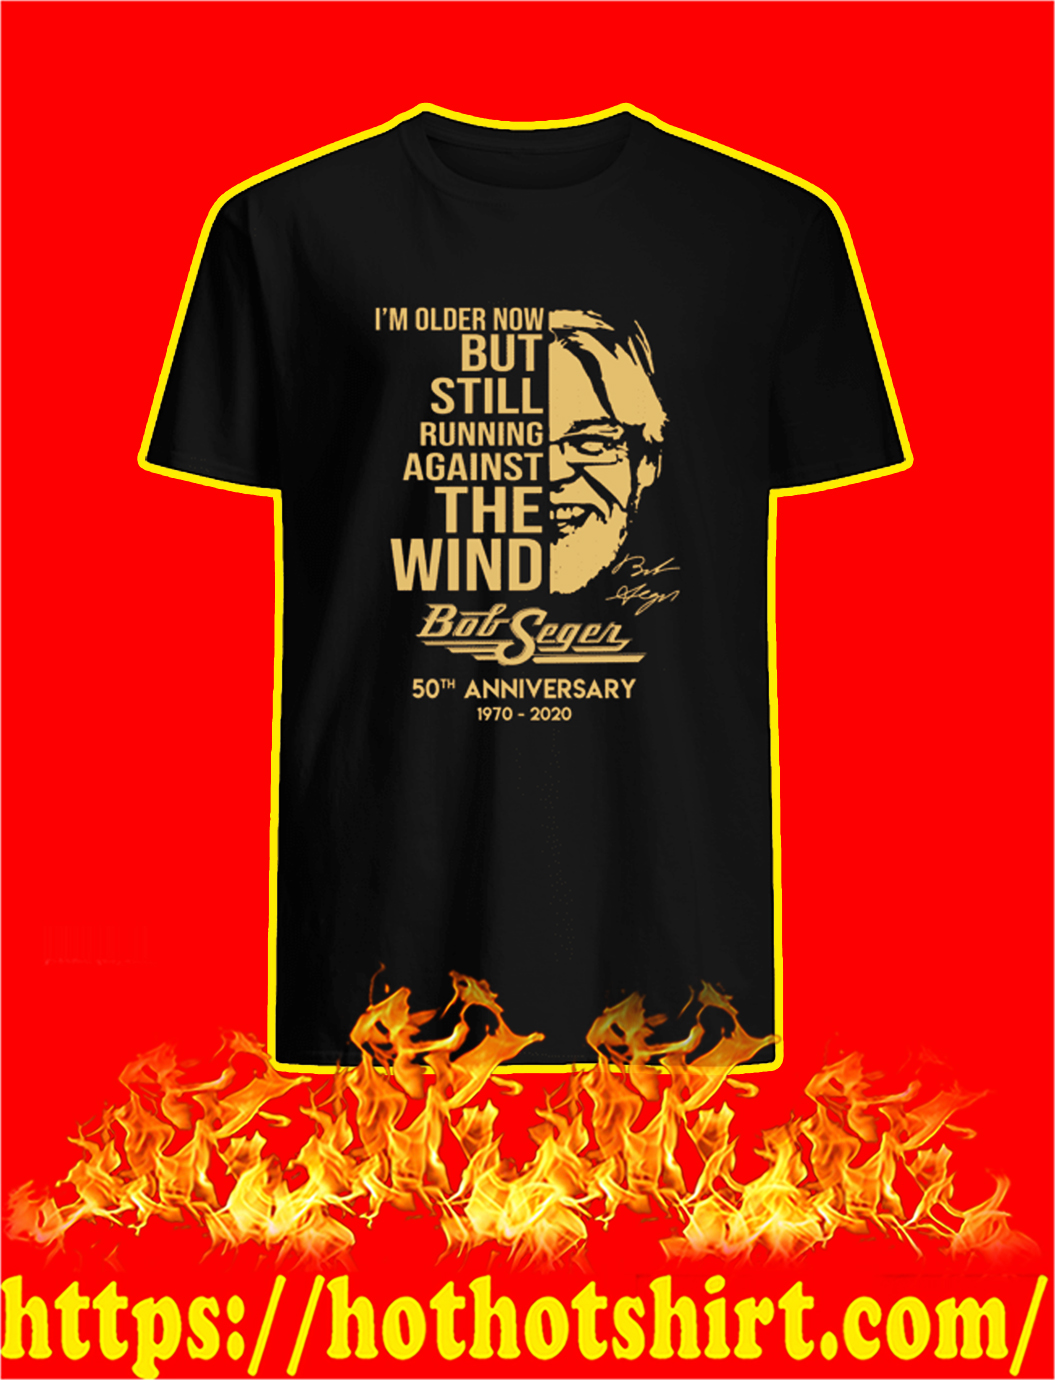 Bob Seger I’m Older Now But Still Running Against The Wind shirt and longsleeve tee